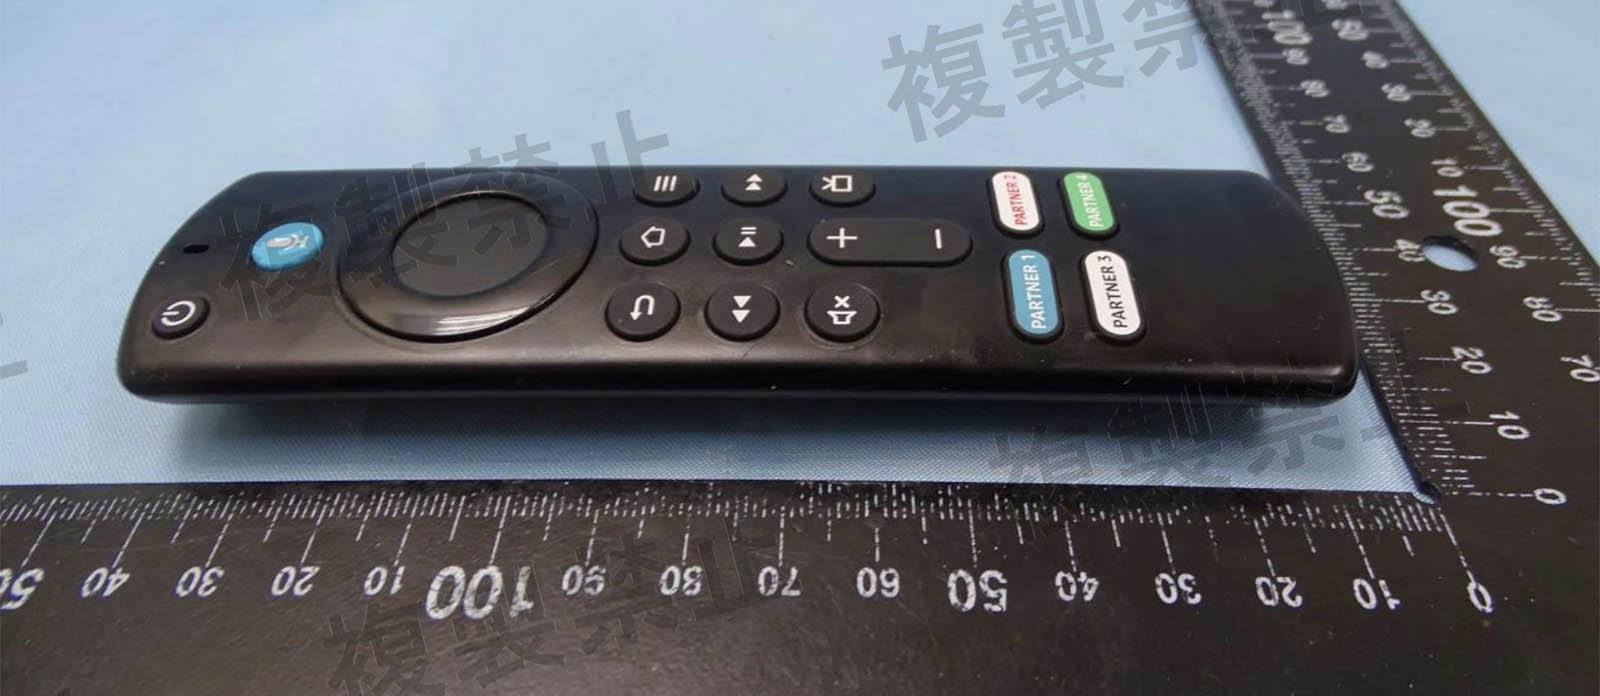 A photo of a rumored new Fire TV remote control